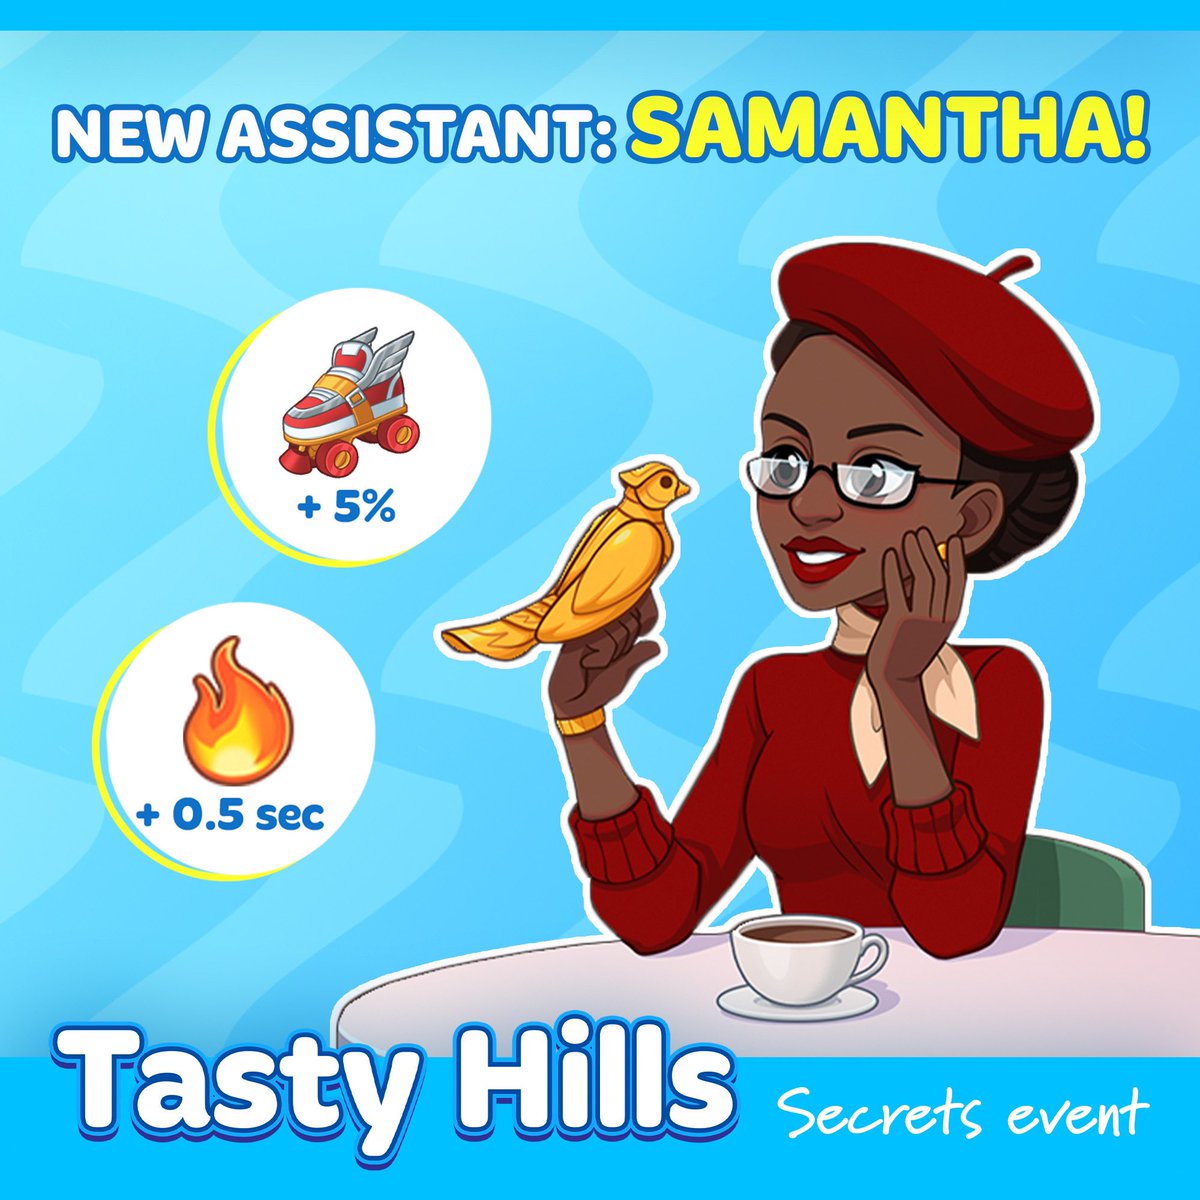 𝗙𝗿𝗲𝘀𝗵 𝗖𝗼𝗼𝗸𝗶𝗻𝗴 𝗗𝗶𝗮𝗿𝘆 𝗨𝗽𝗱𝗮𝘁𝗲 𝗔𝗹𝗲𝗿𝘁! 🌟 Get ready for a delightful culinary experience and explore the patch notes made exclusively for you. We've created new icons, and we're eager to hear your thoughts on them! Share your feedback in the comments below.… https://t.co/DiUxuvmy9B 